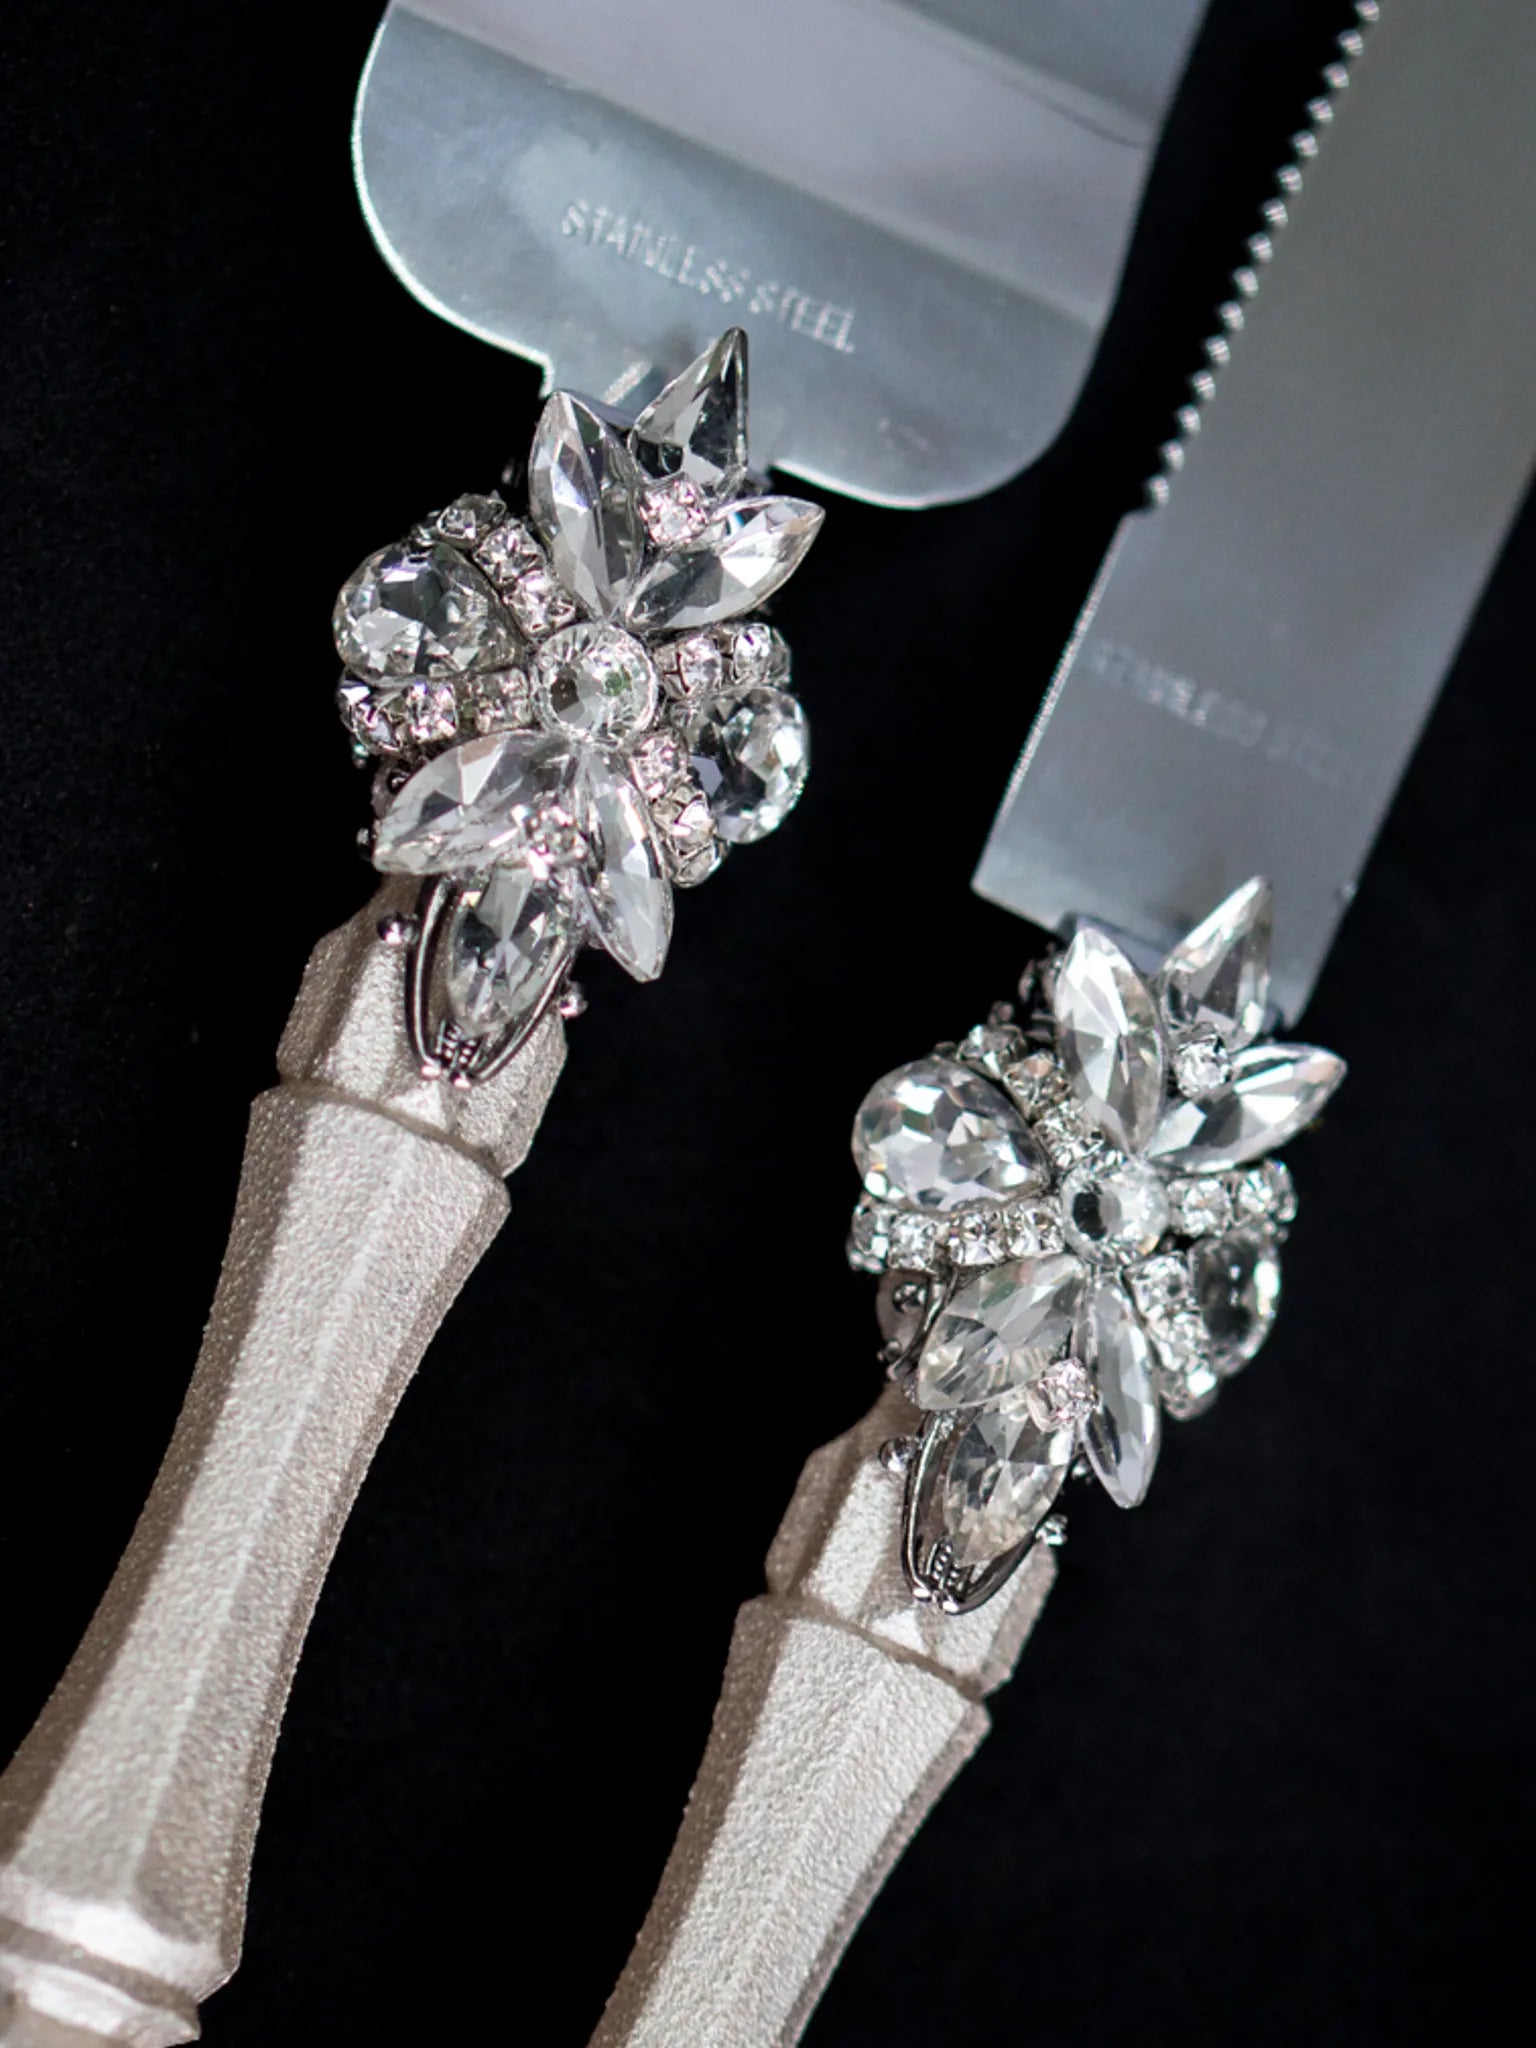 Elegant cake server and knife with crystals